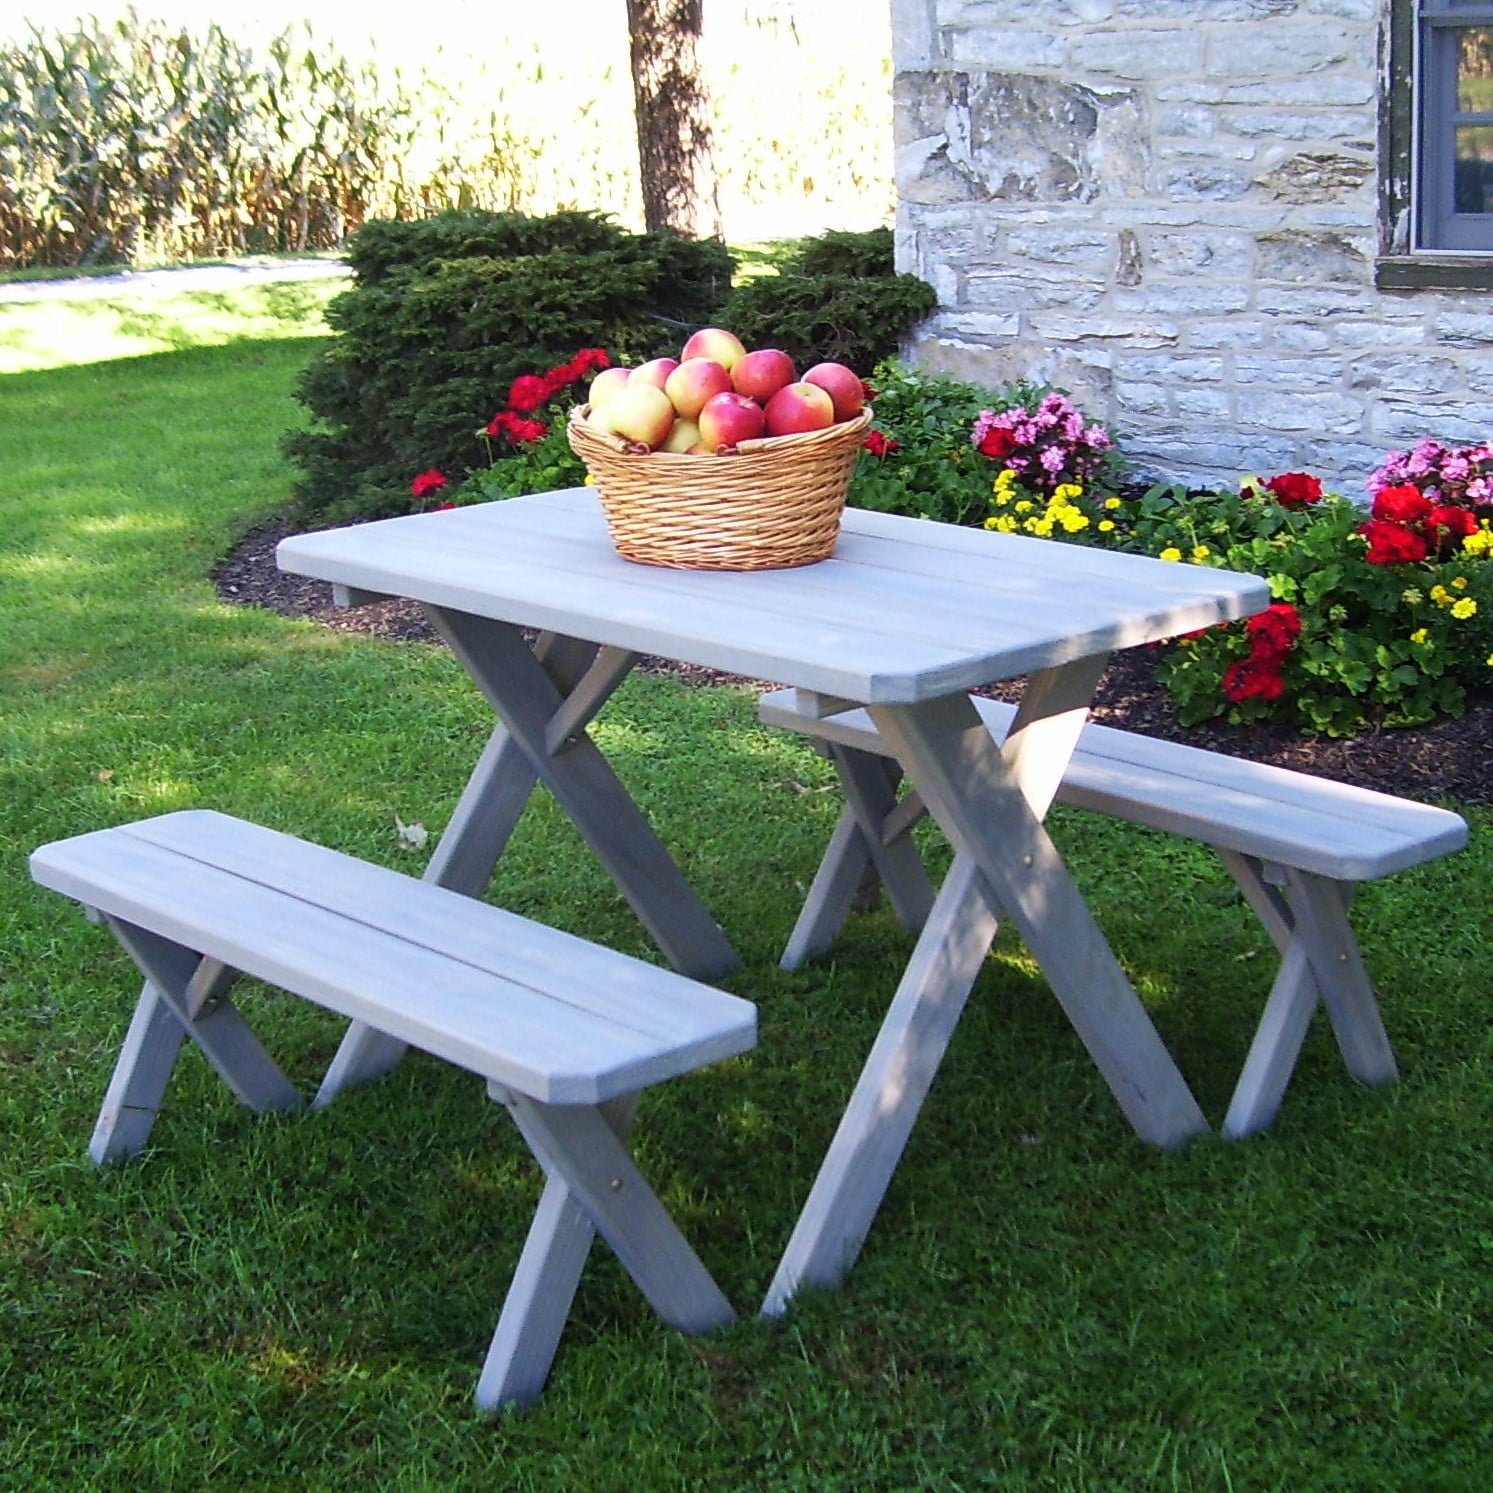 Pressure Treated Pine Cross Leg Picnic Table with Benches